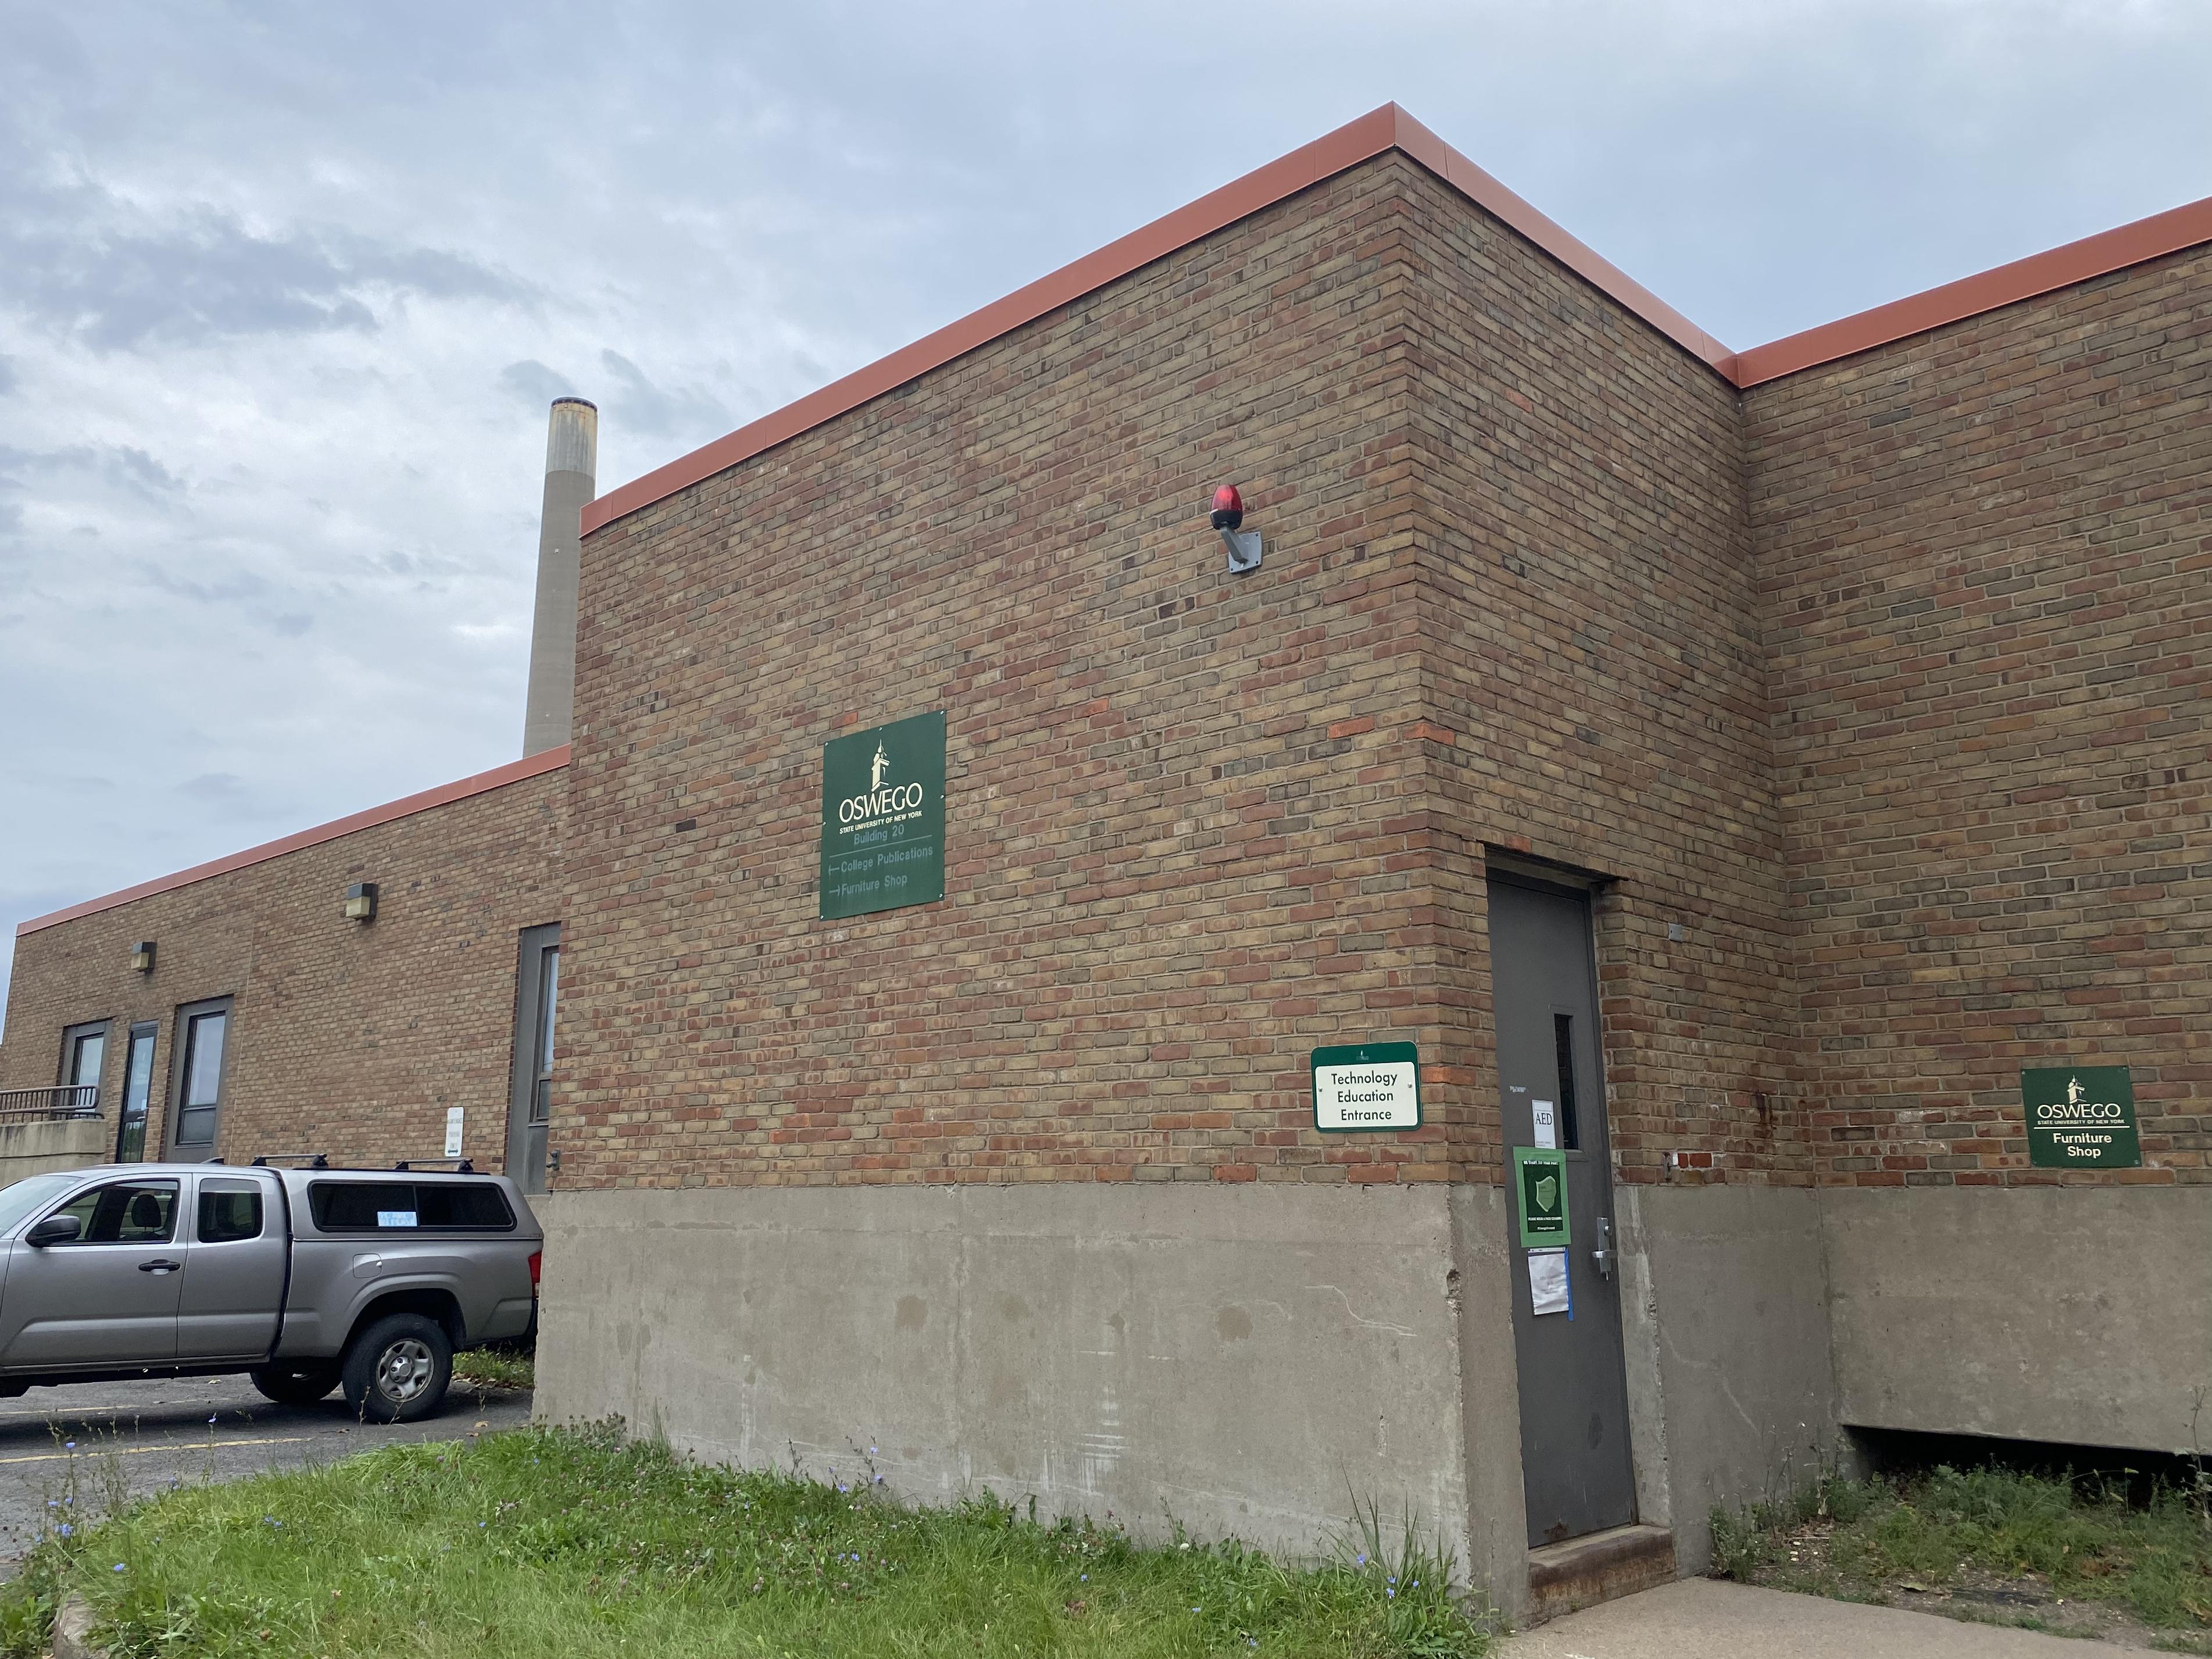 The Office of Sustainability's new home is Building 20, also known as the Service Building, across the street from Rich Hall and next to Lonis-Mackin-Moreland on the eastern edge of the main campus.